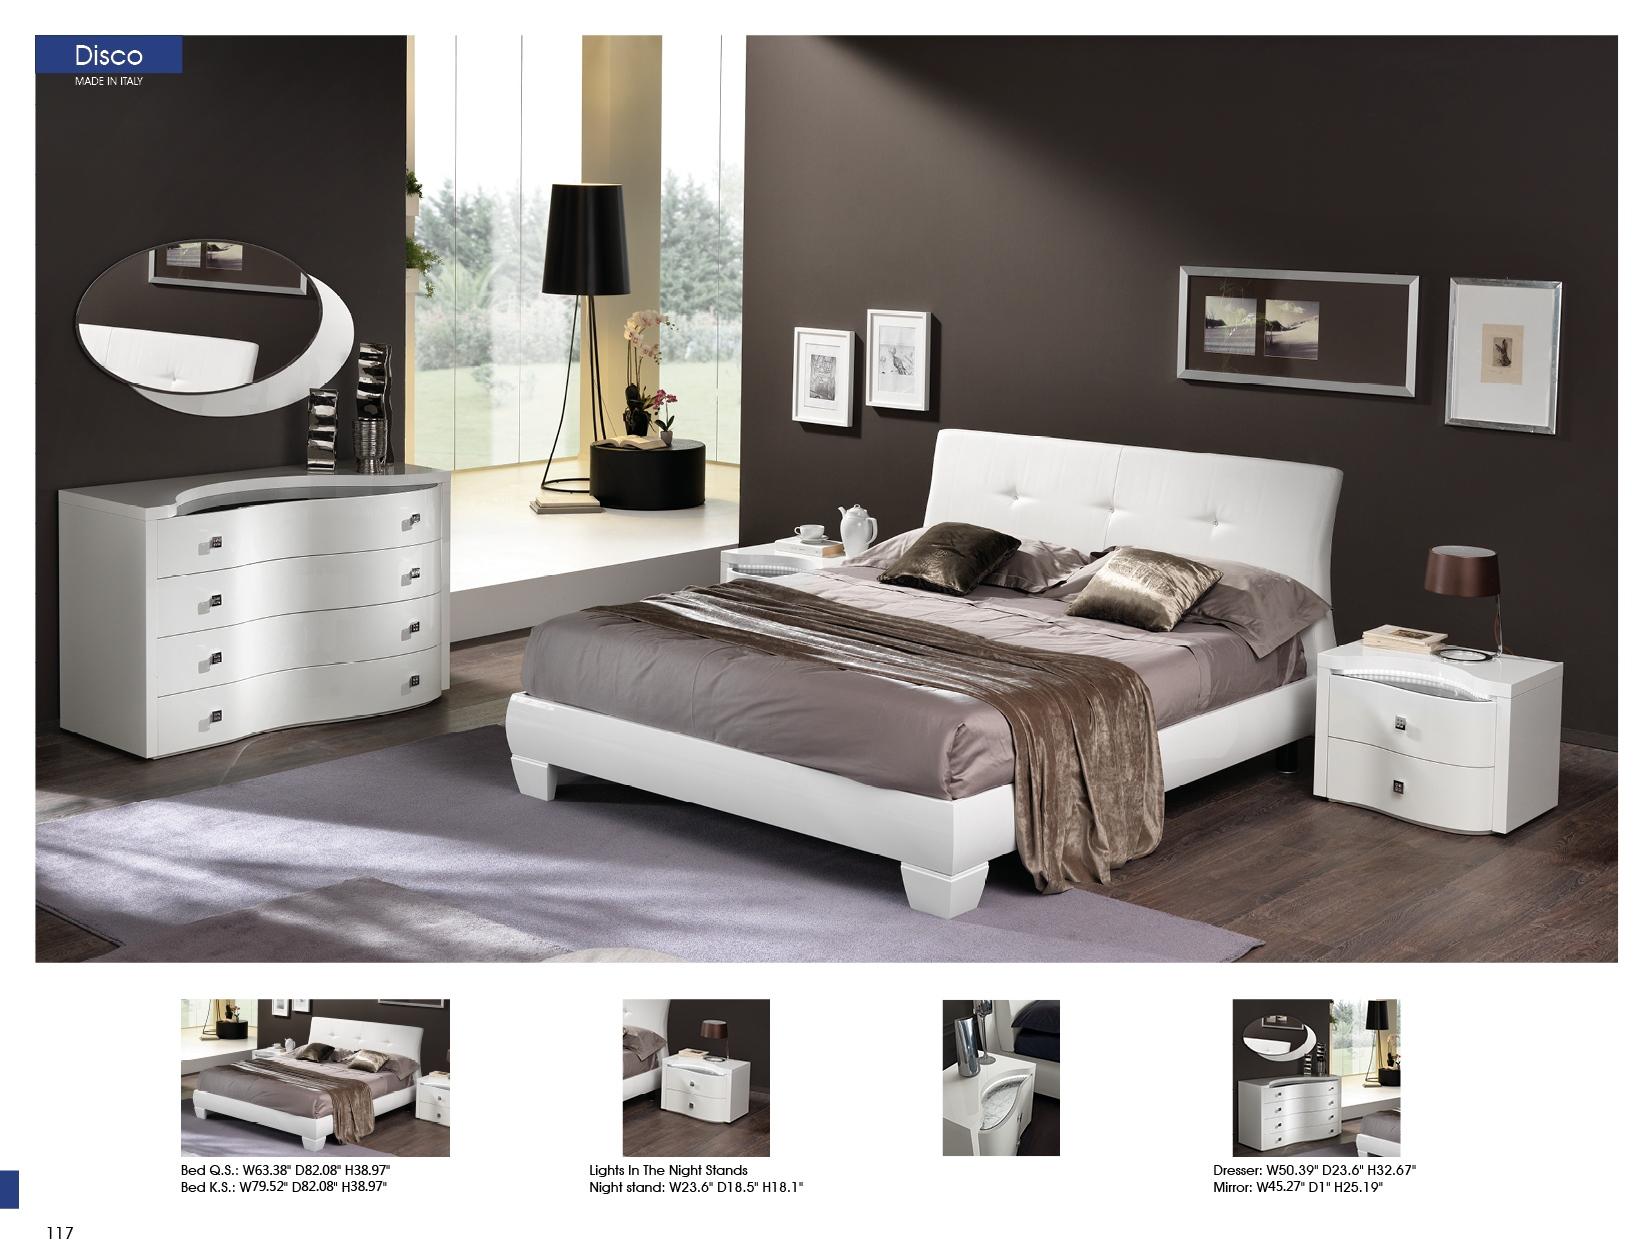 

    
ESF Disco White Queen Bedroom Set 5Pcs Nightstands w/lights Made in Italy Modern
